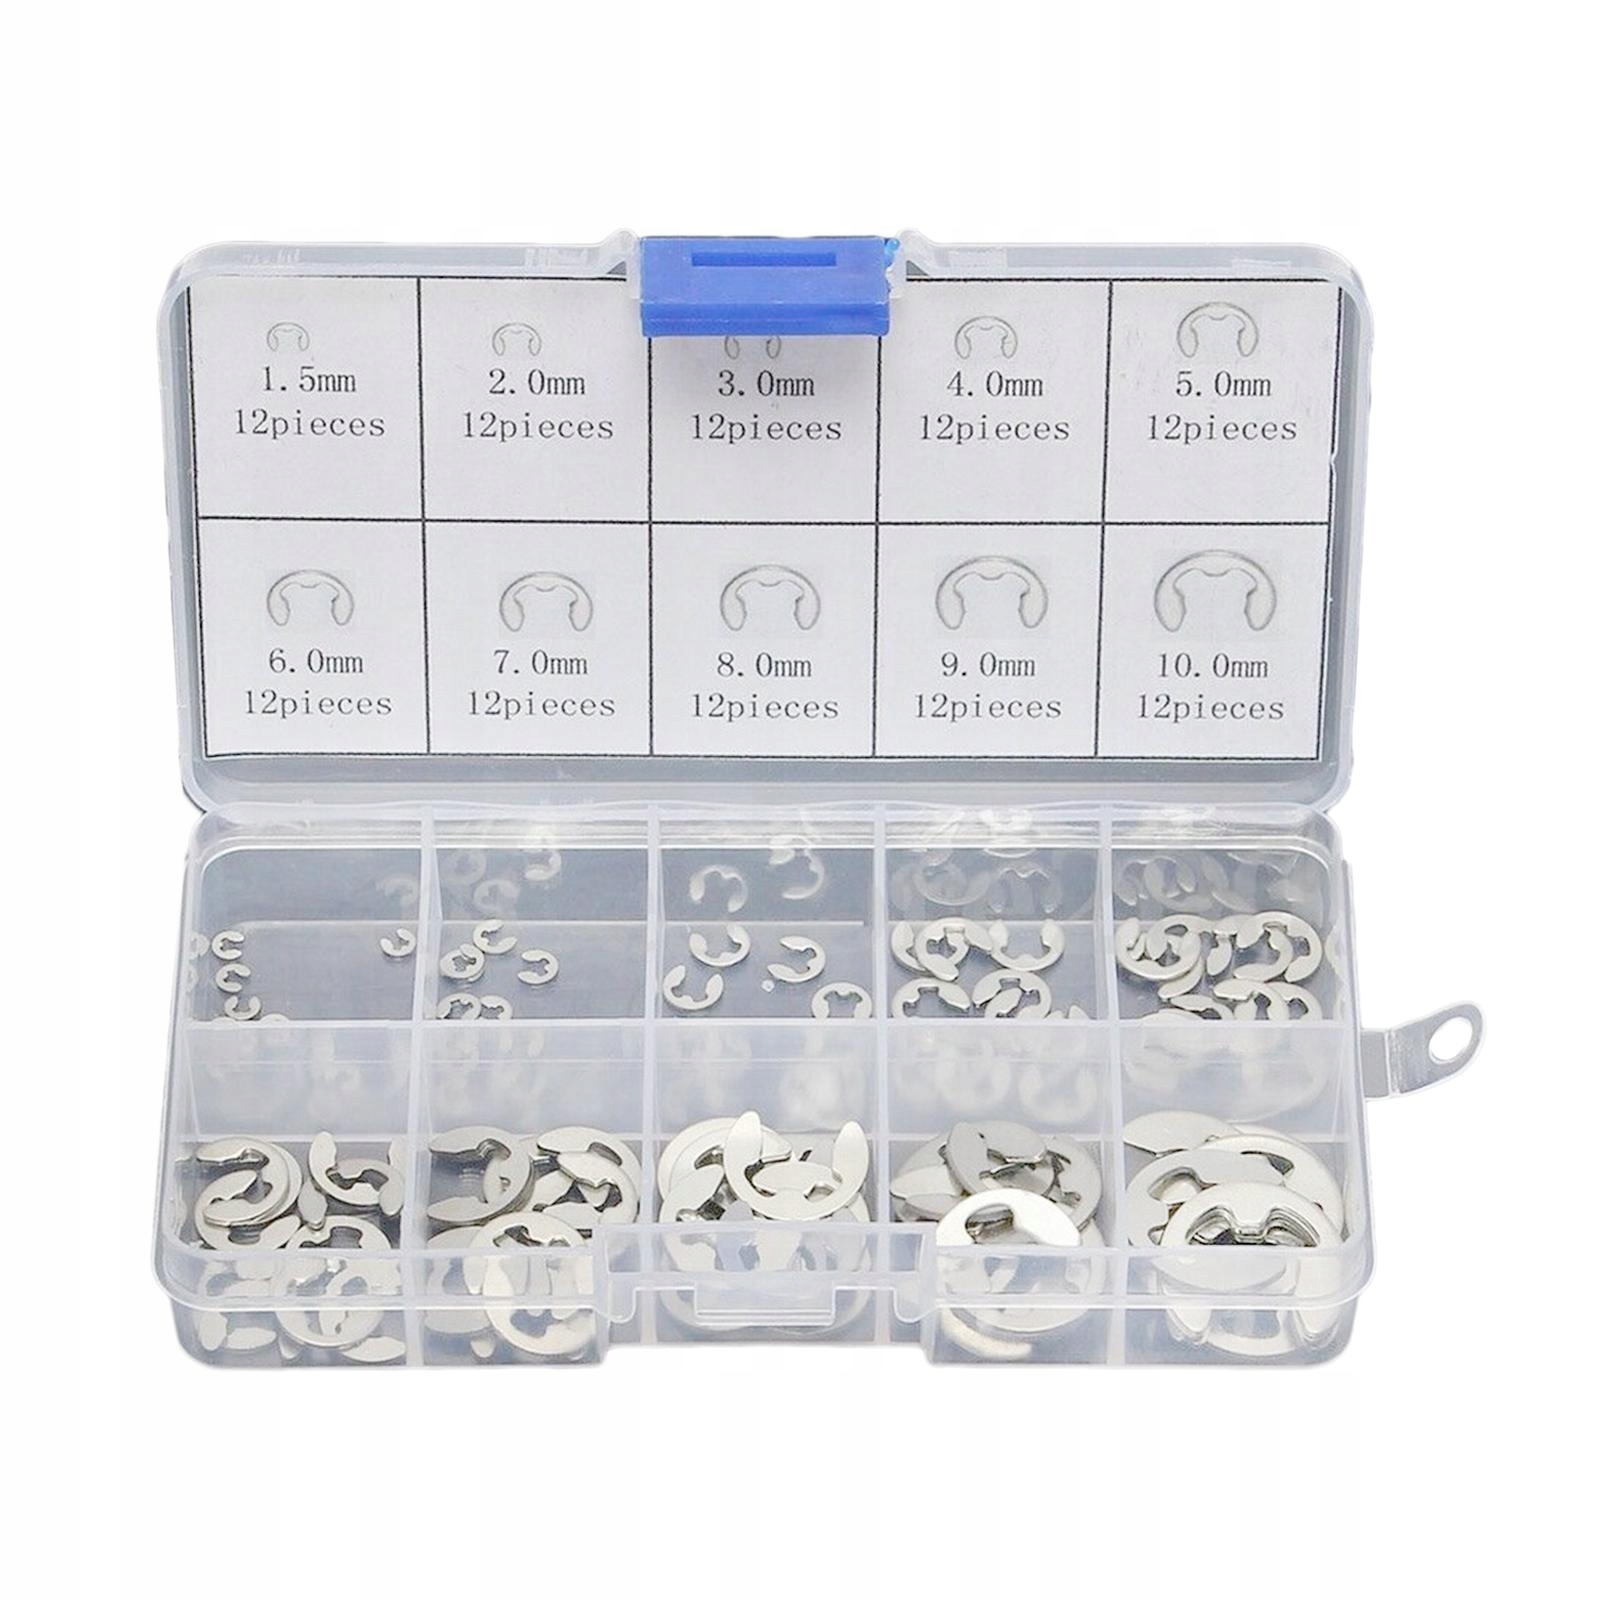 Stainless Steel E Clips Circlip Kit Retaining 120x Assorted M1. M10mm